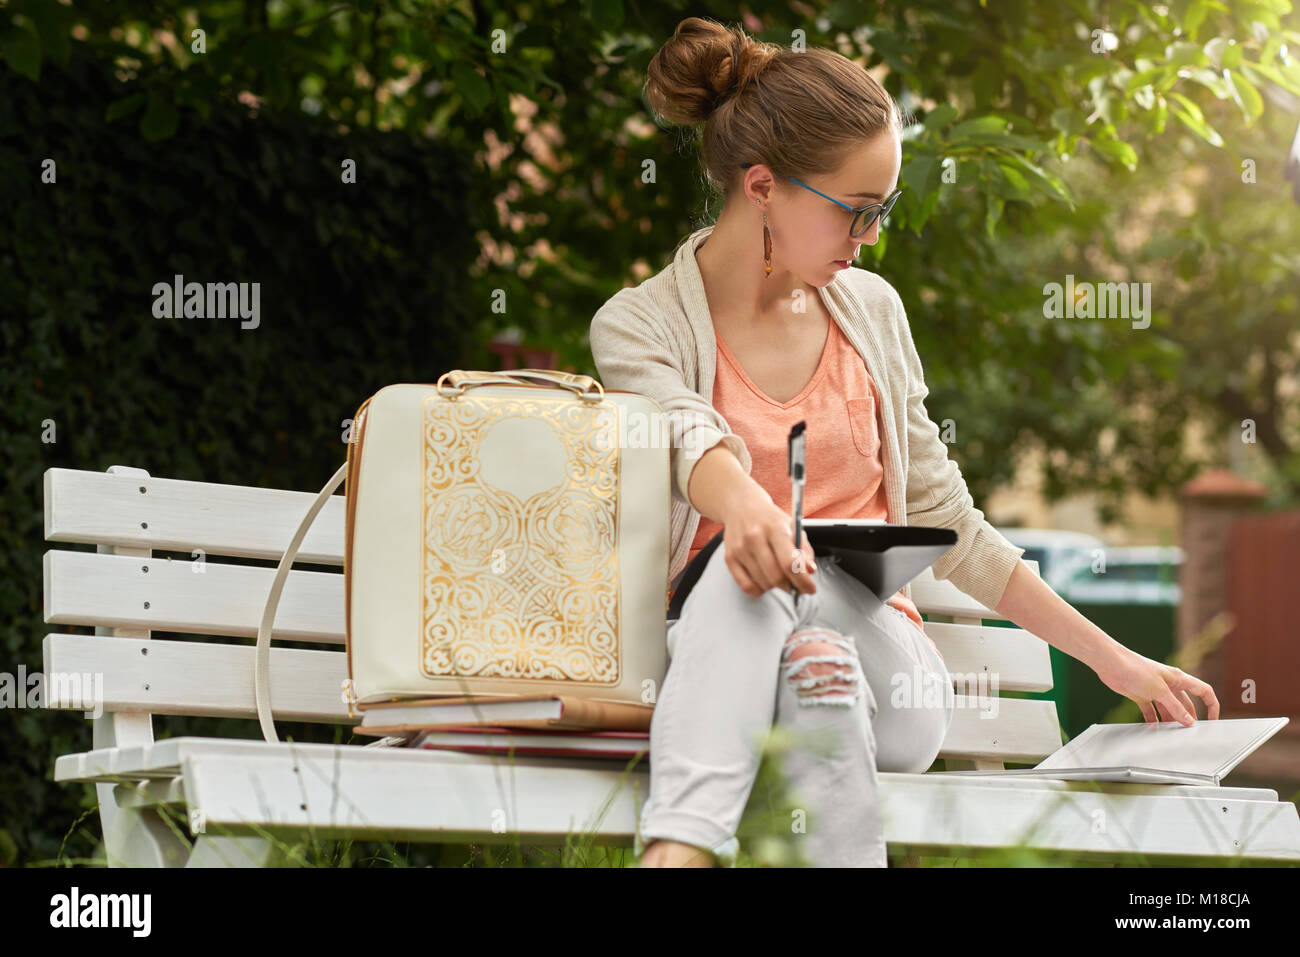 Pretty student studies on a white bech in a city park Stock Photo